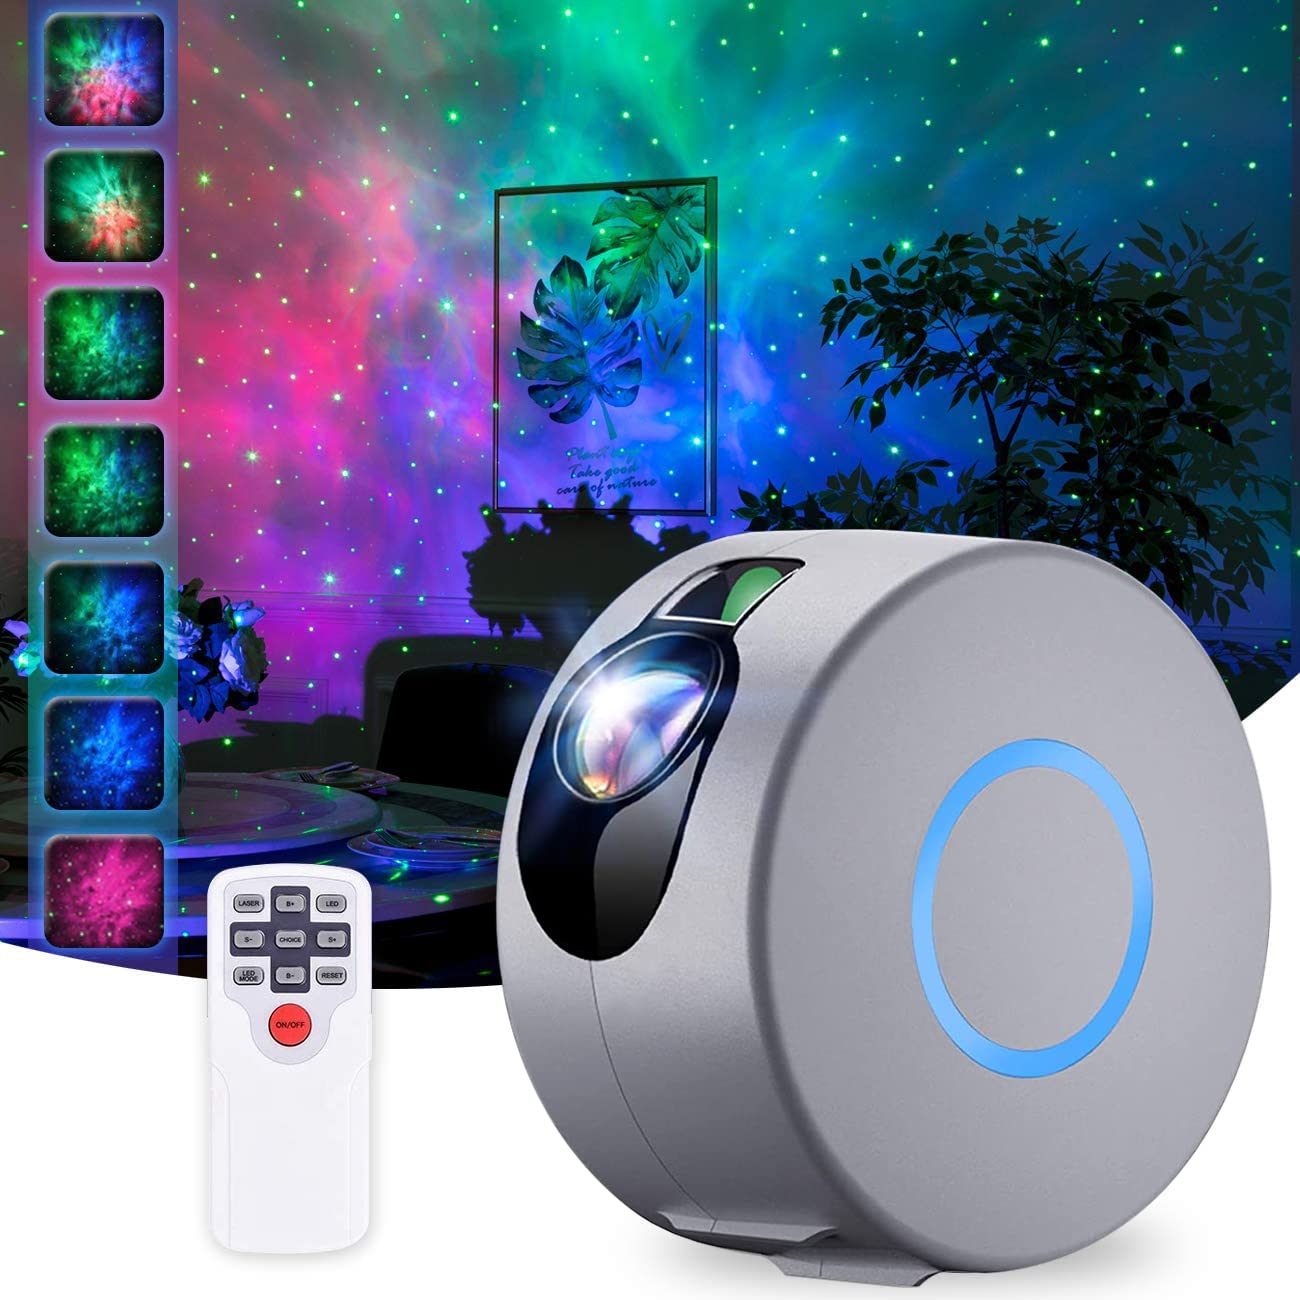 40X60 Monocular,Star Light Projector with Remote Control for Kids Adults Bedroom/Home Theatre/Party/Game Rooms and Night Light Ambience-Grey